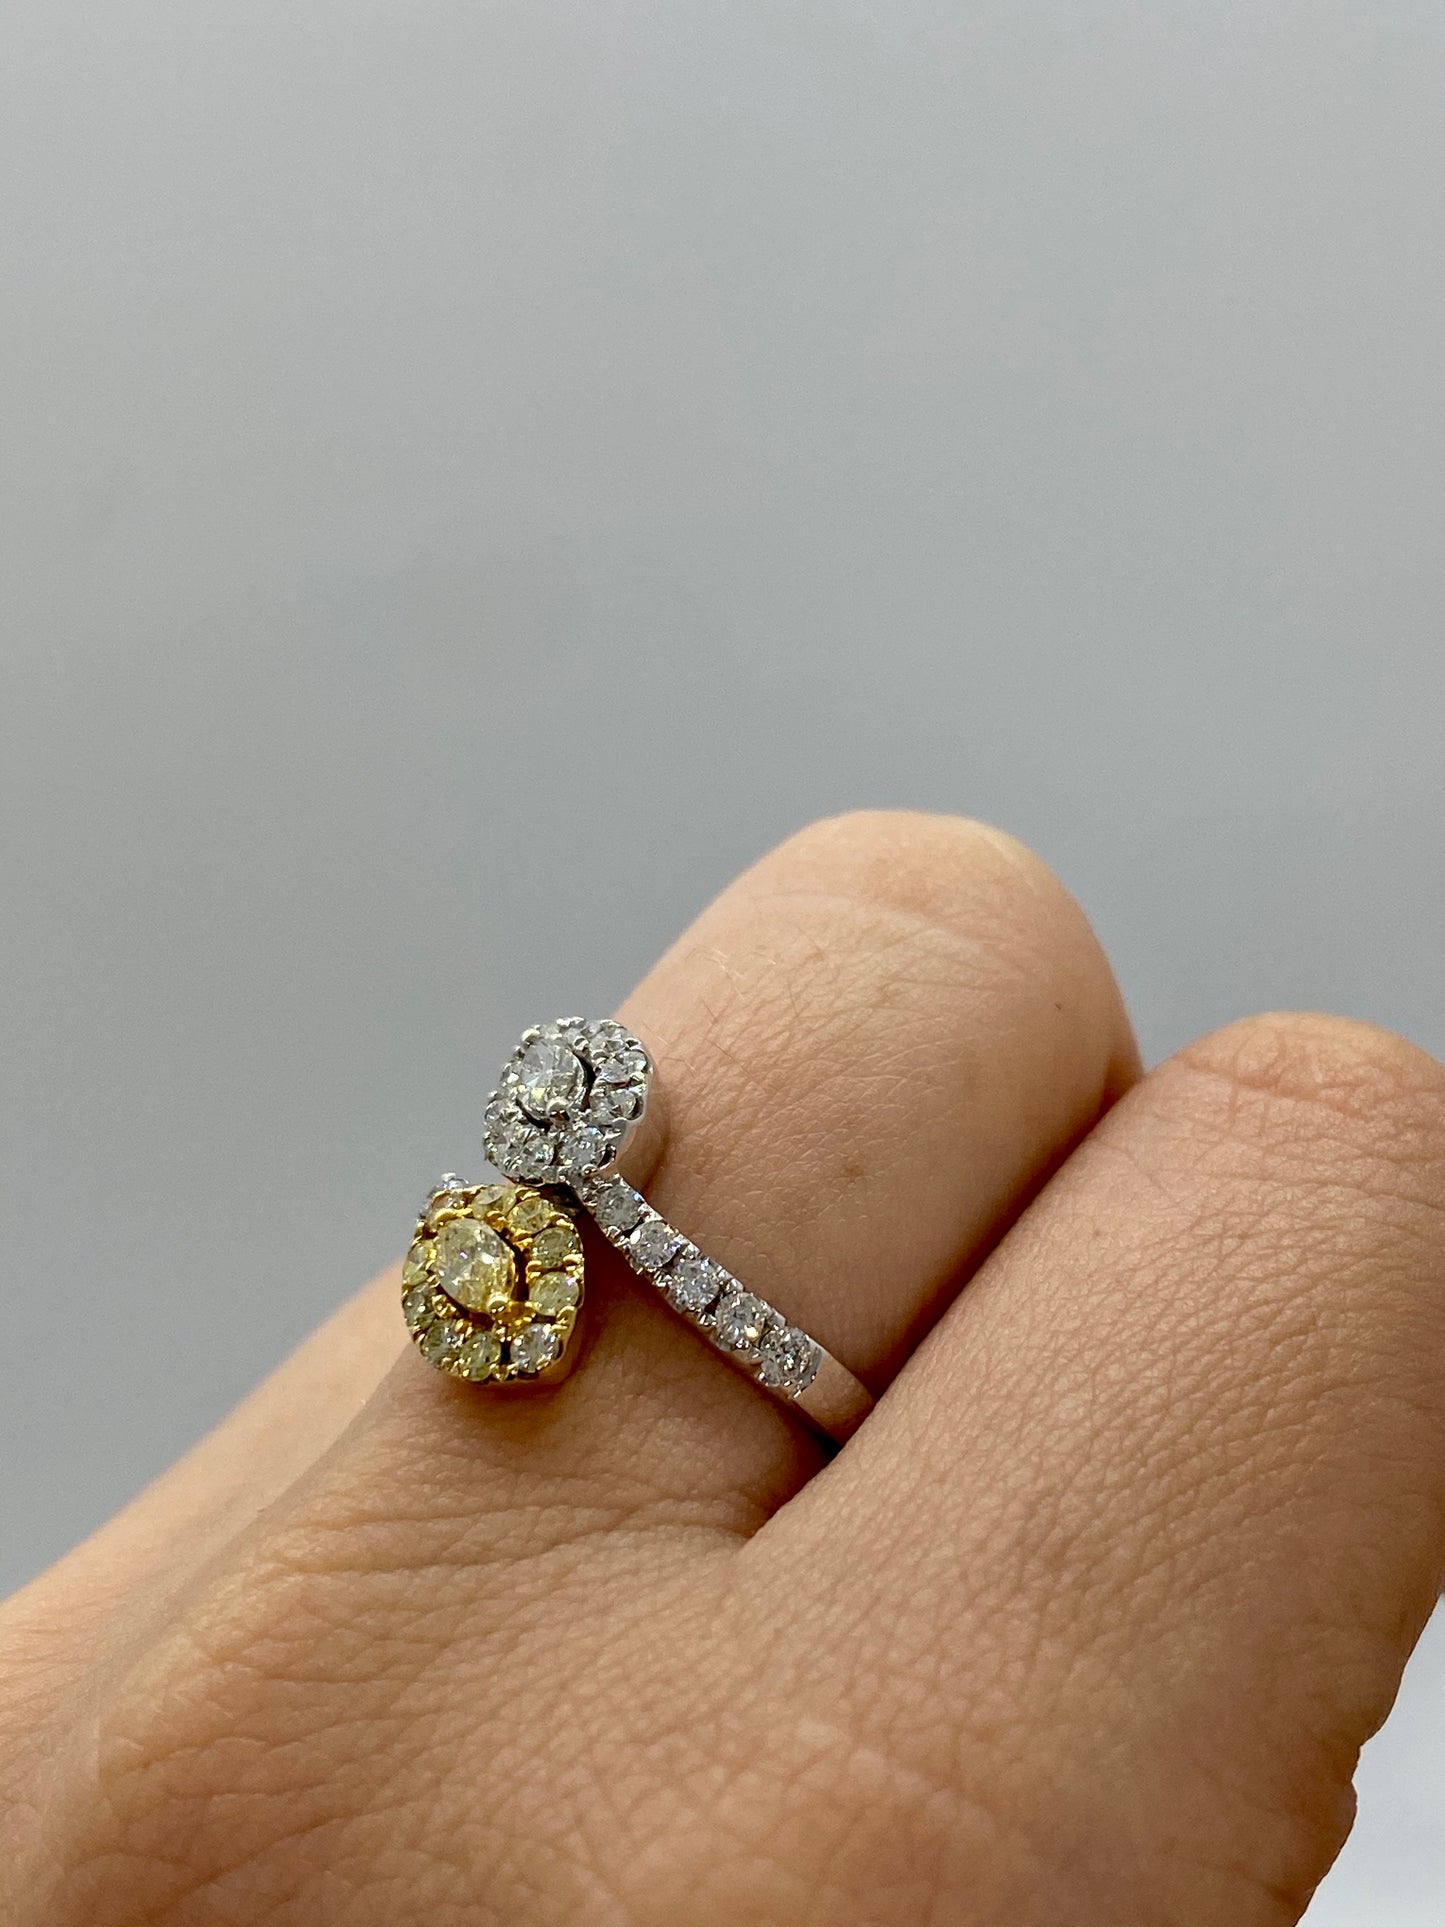 Yellow Diamond Ring R22216 - Royal Gems and Jewelry